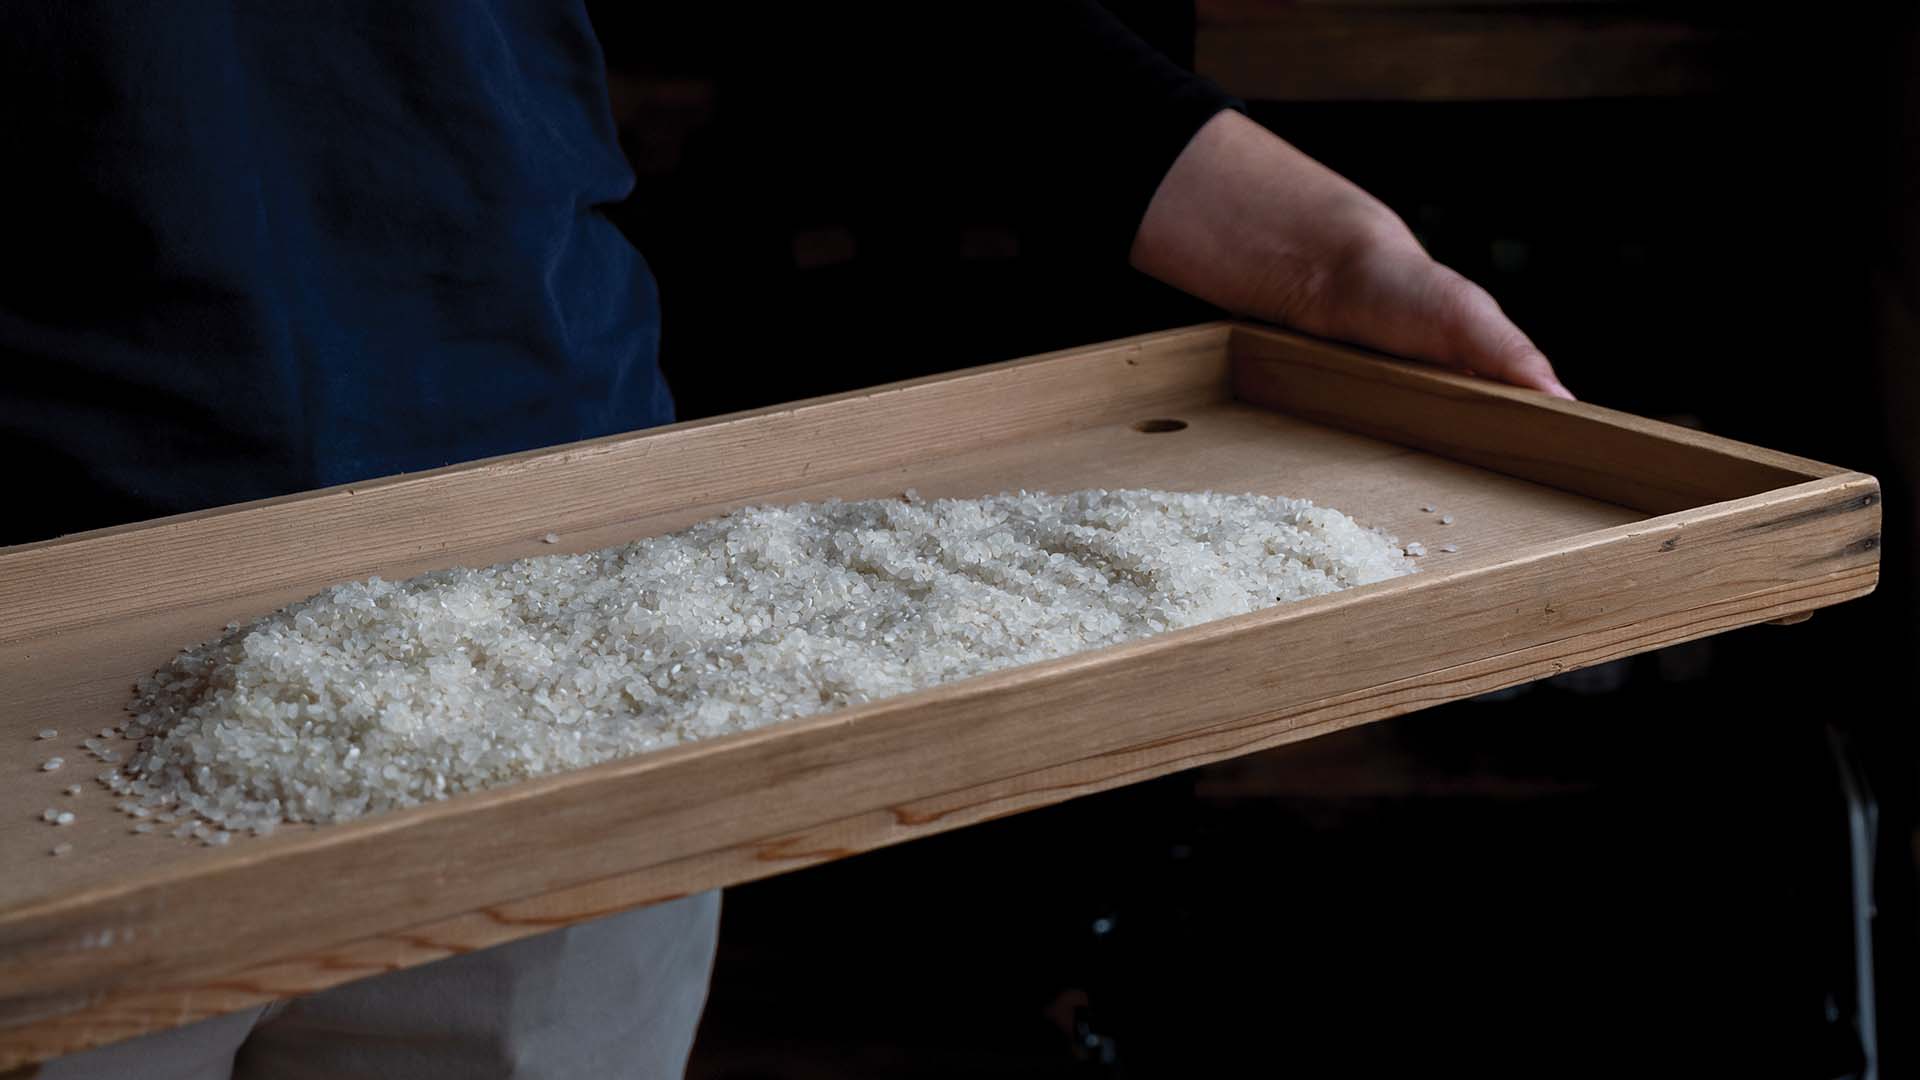 a person holding a wooden tray with white crystals